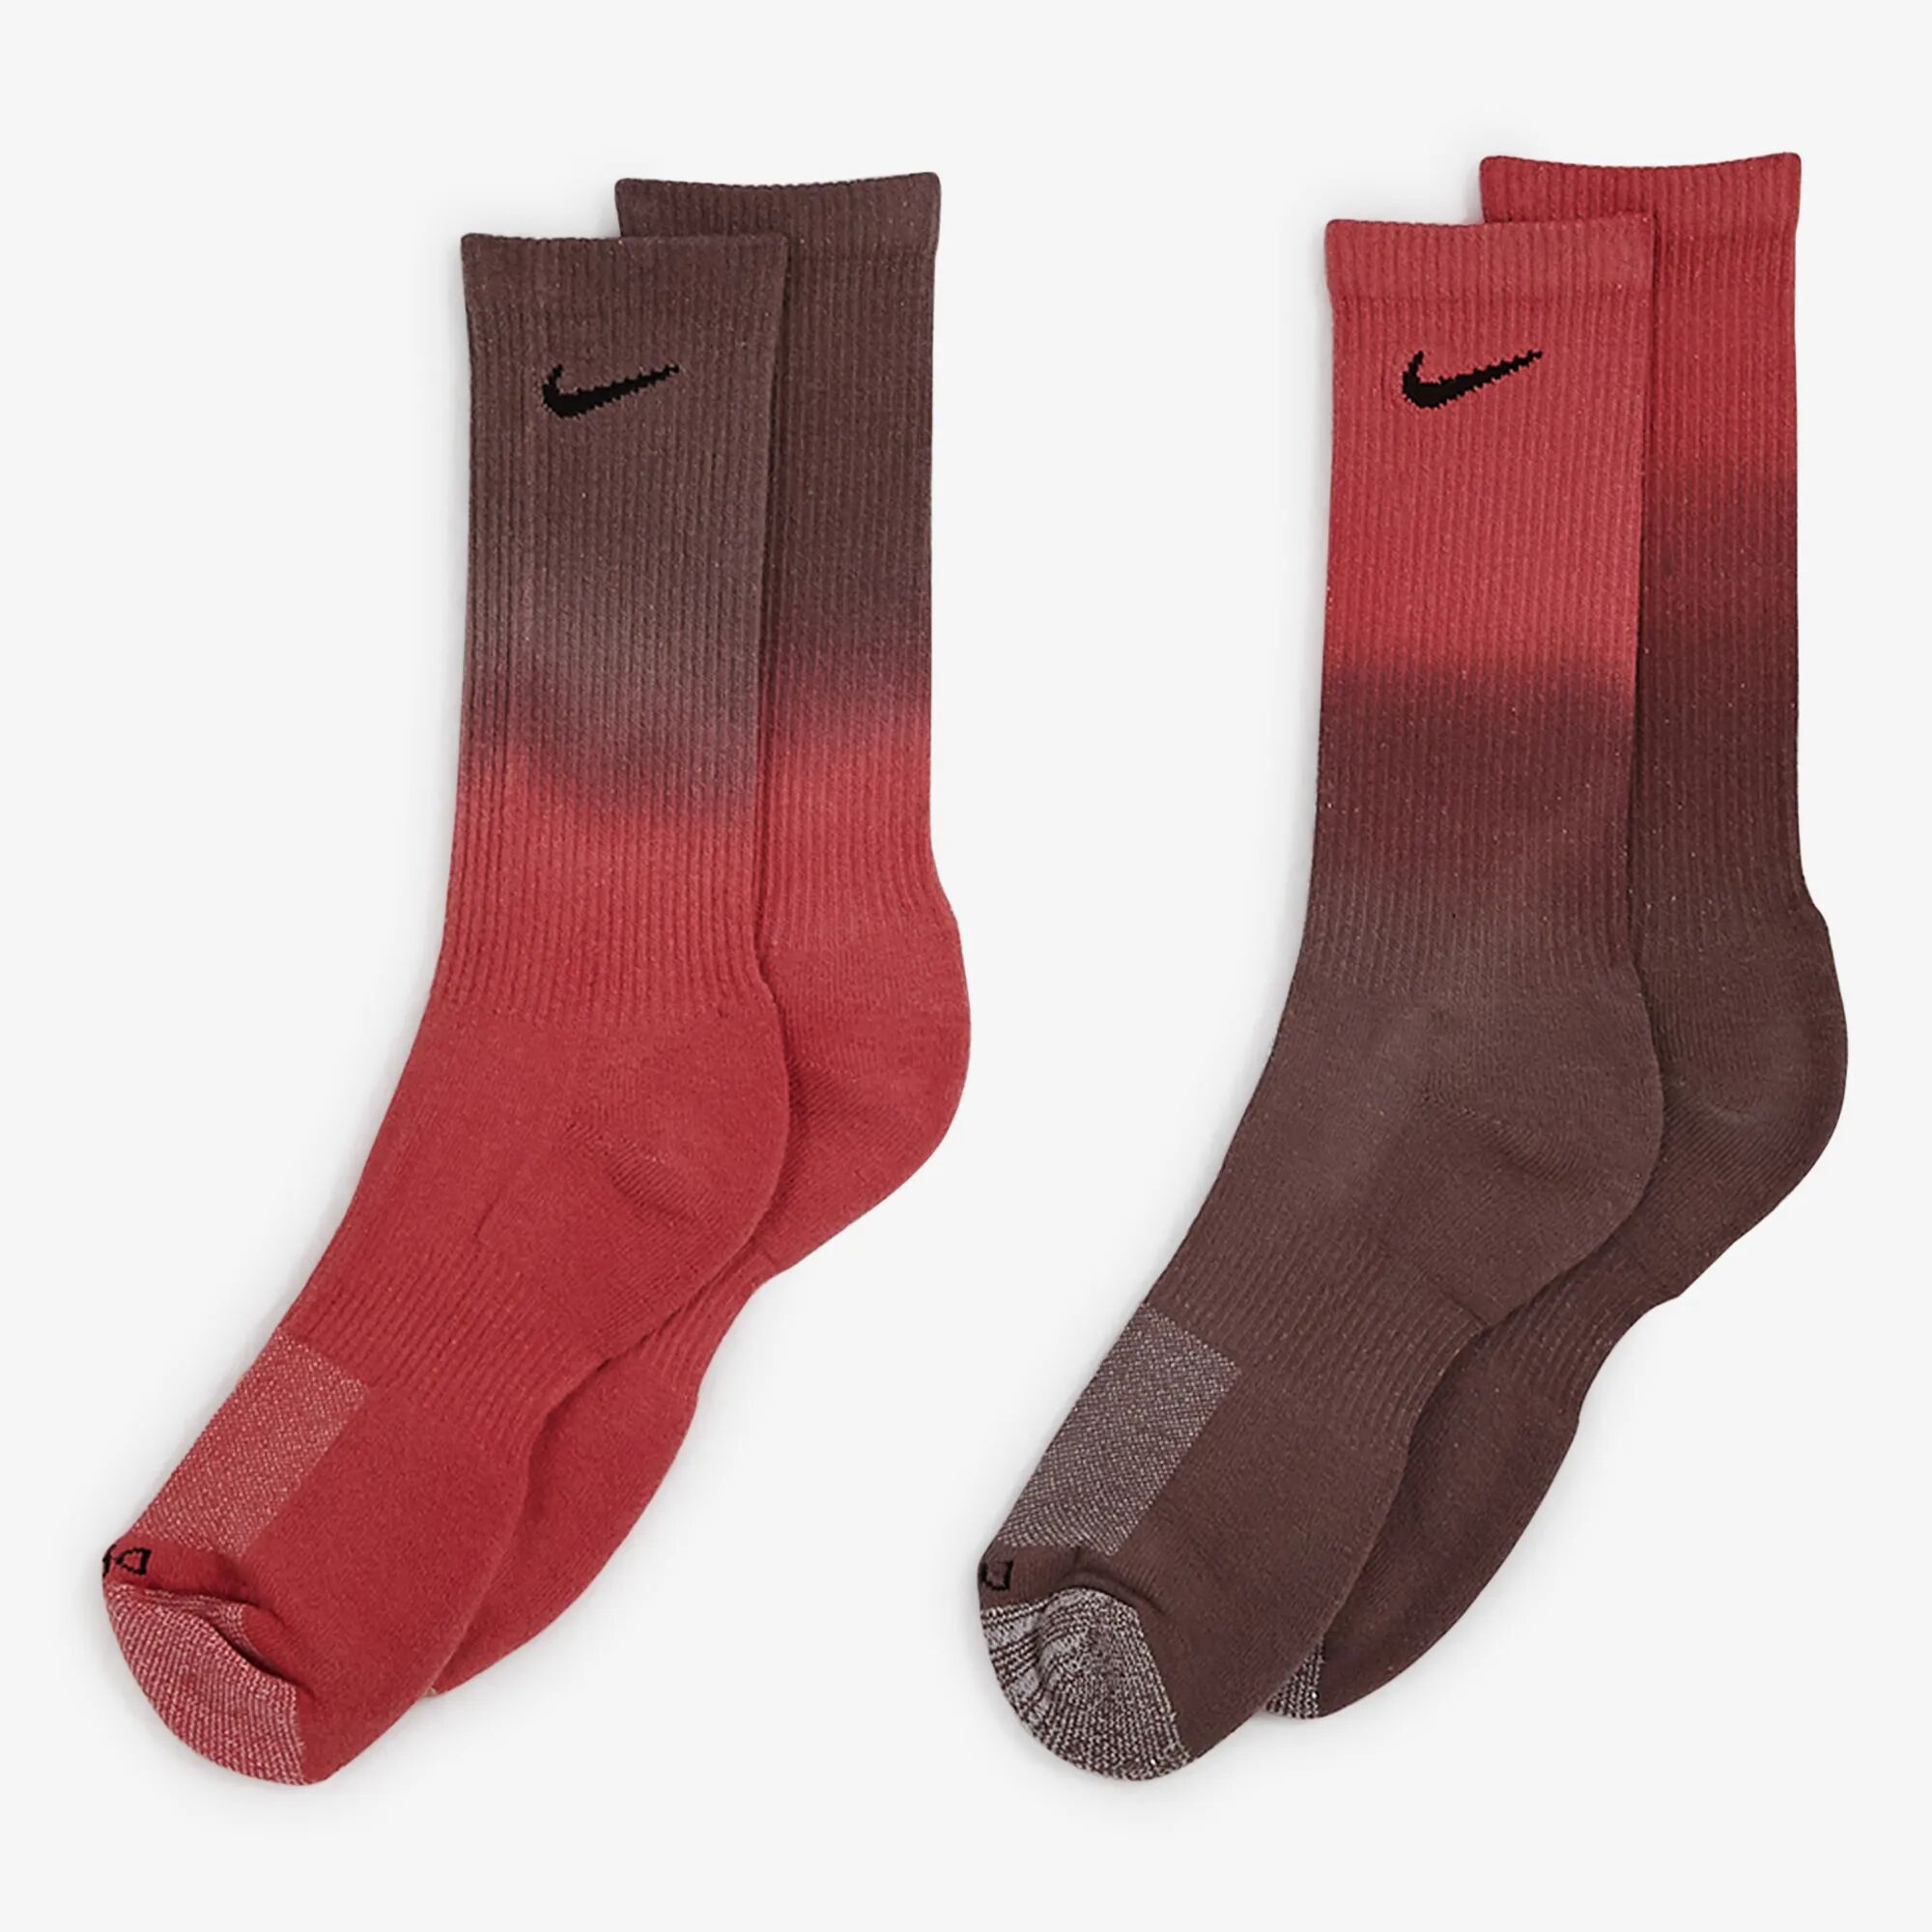 Nike Chaussettes X2 Crew Tie Dye rouge 35/38 homme